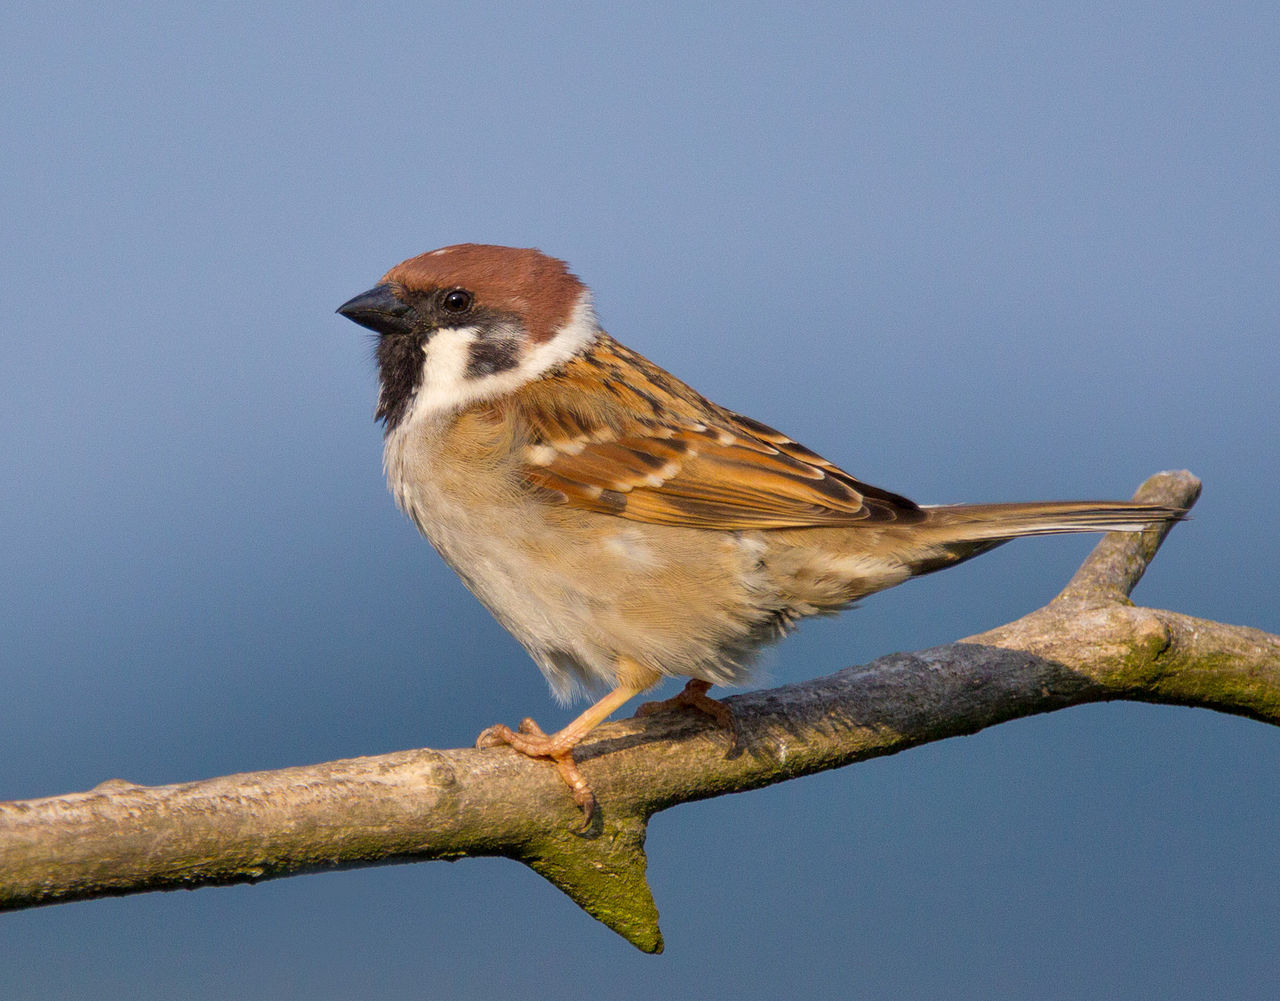 A tree sparrow. Credit: Andreas Trepte